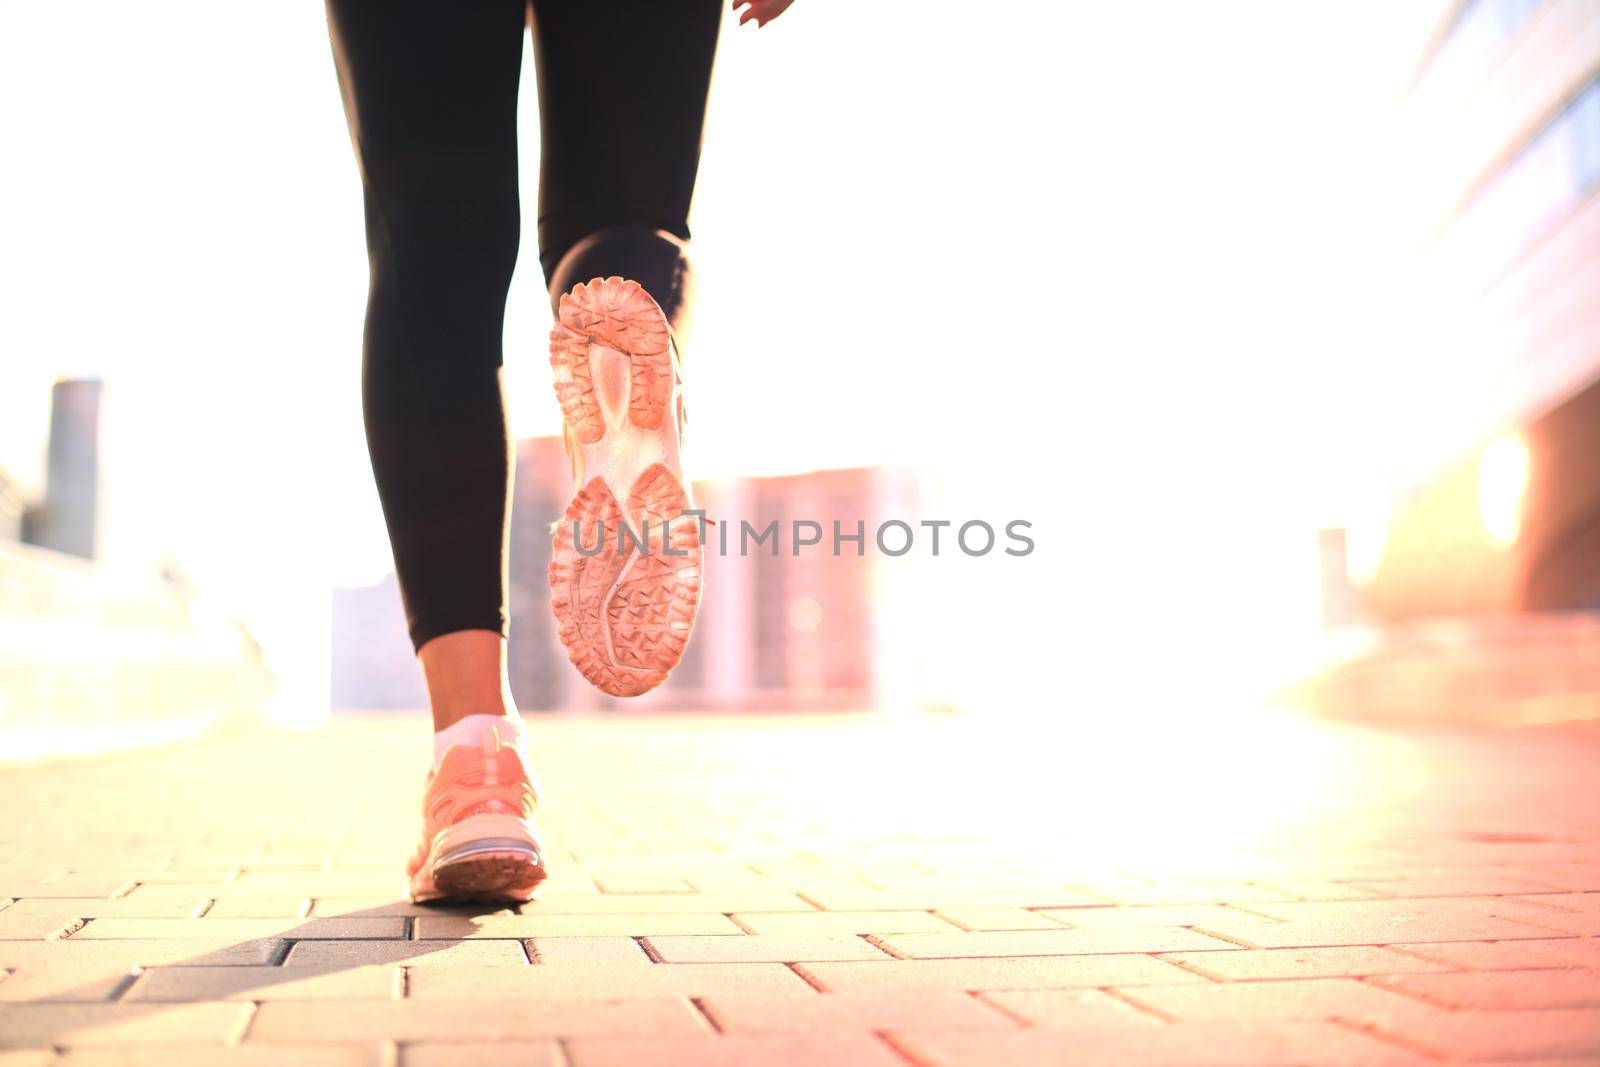 Runner feet running on road closeup on shoe, outdoor at sunset or sunrise in city by tsyhun